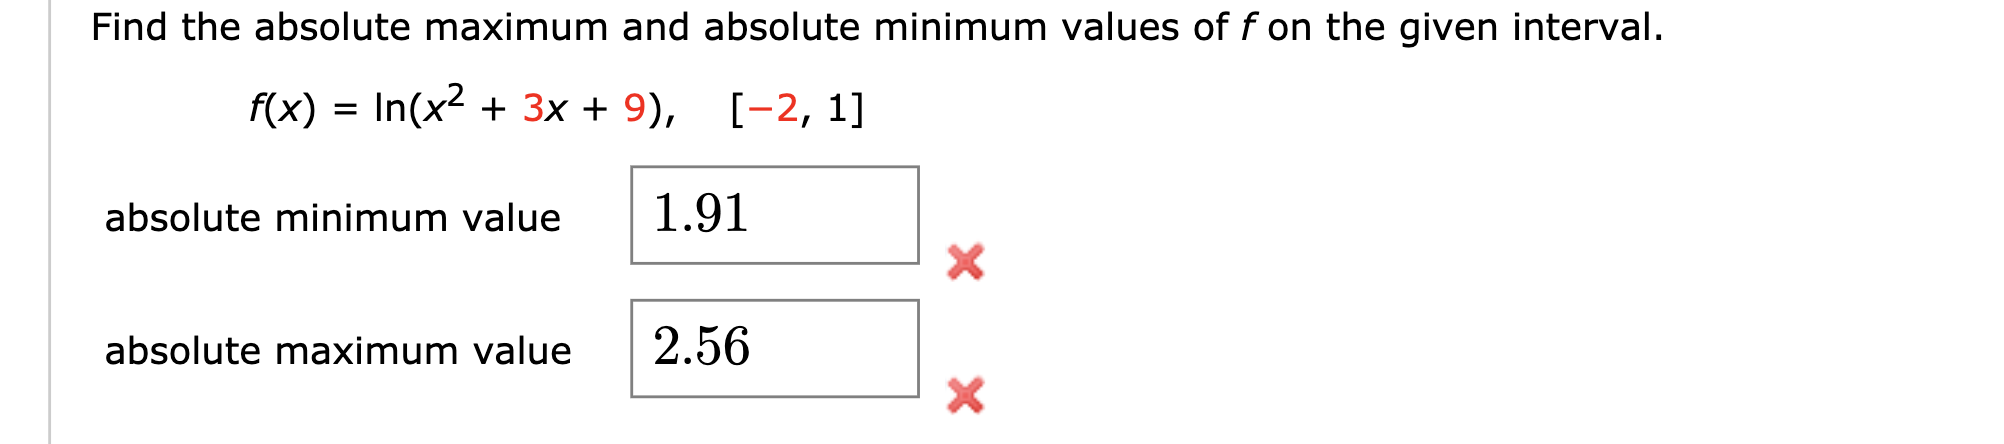 solved-find-the-absolute-maximum-and-absolute-minimum-chegg